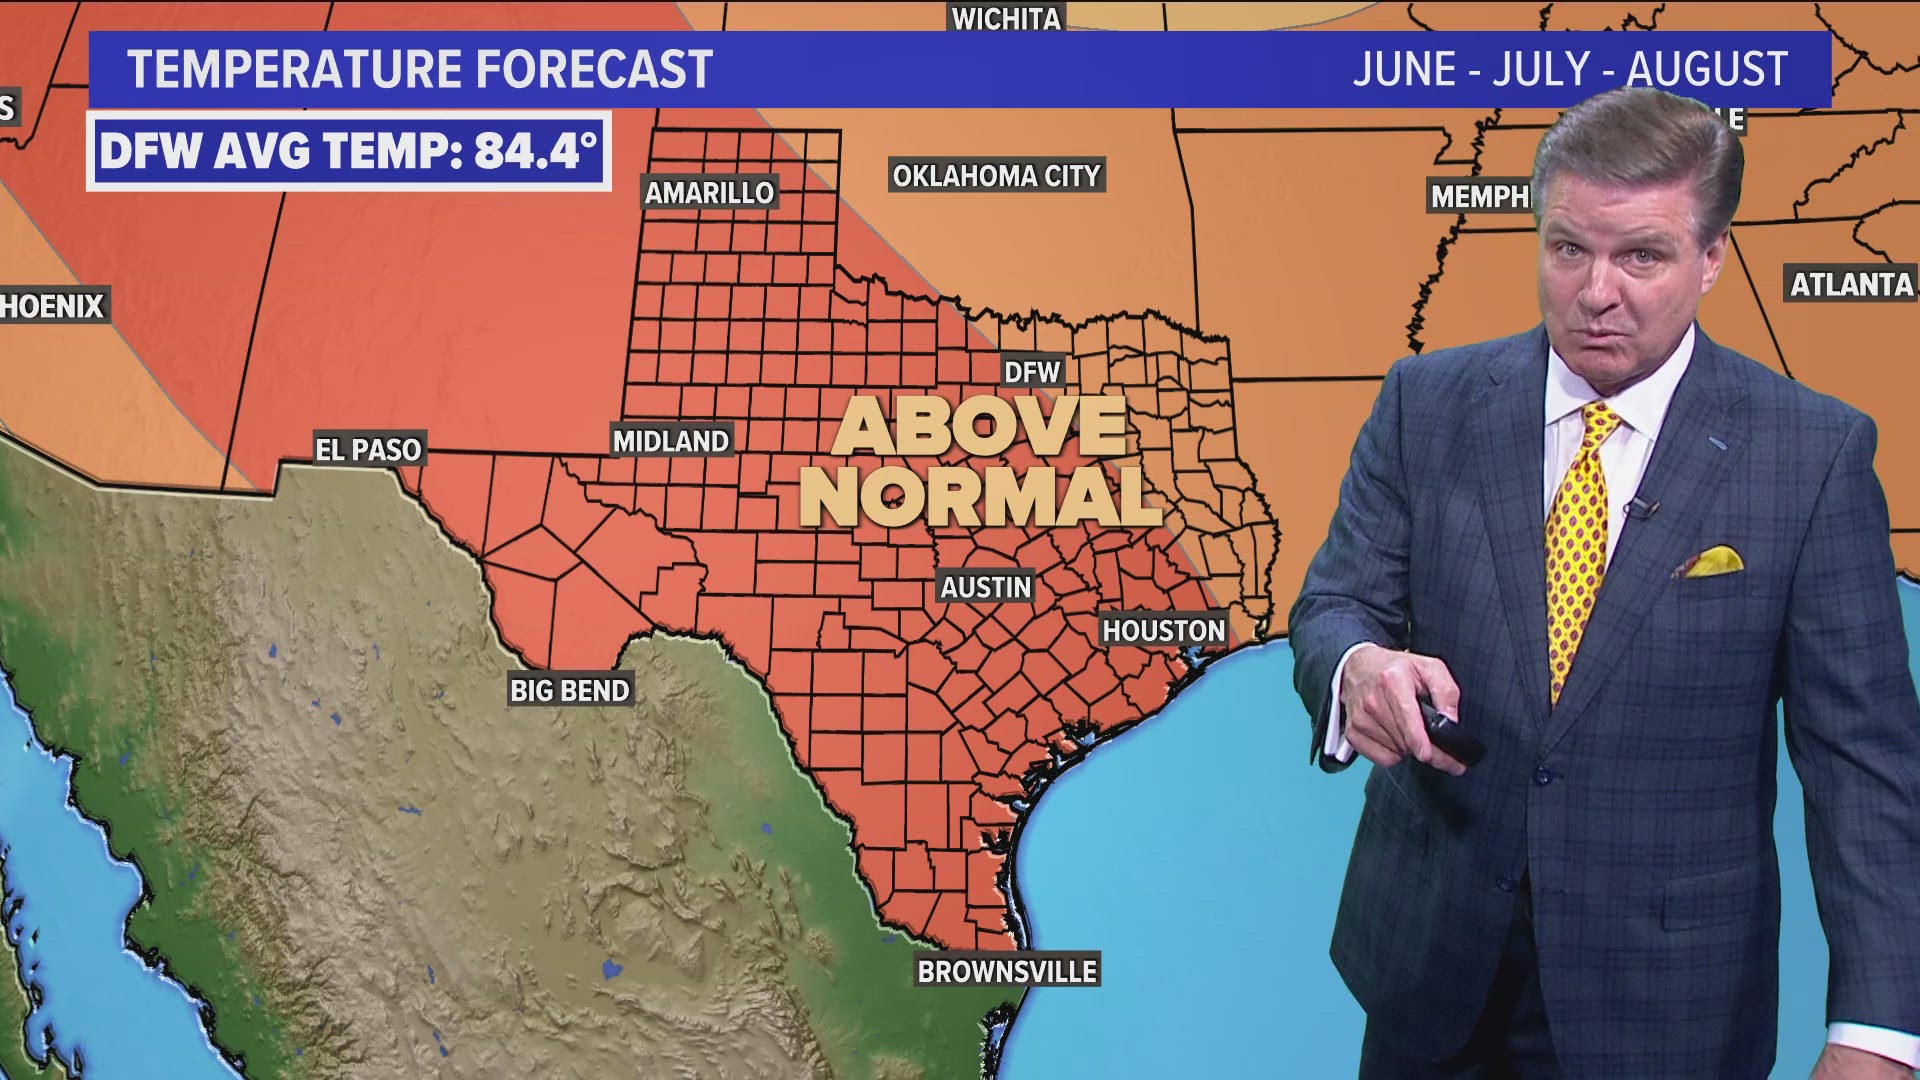 Above normal temperatures are expected this summer.